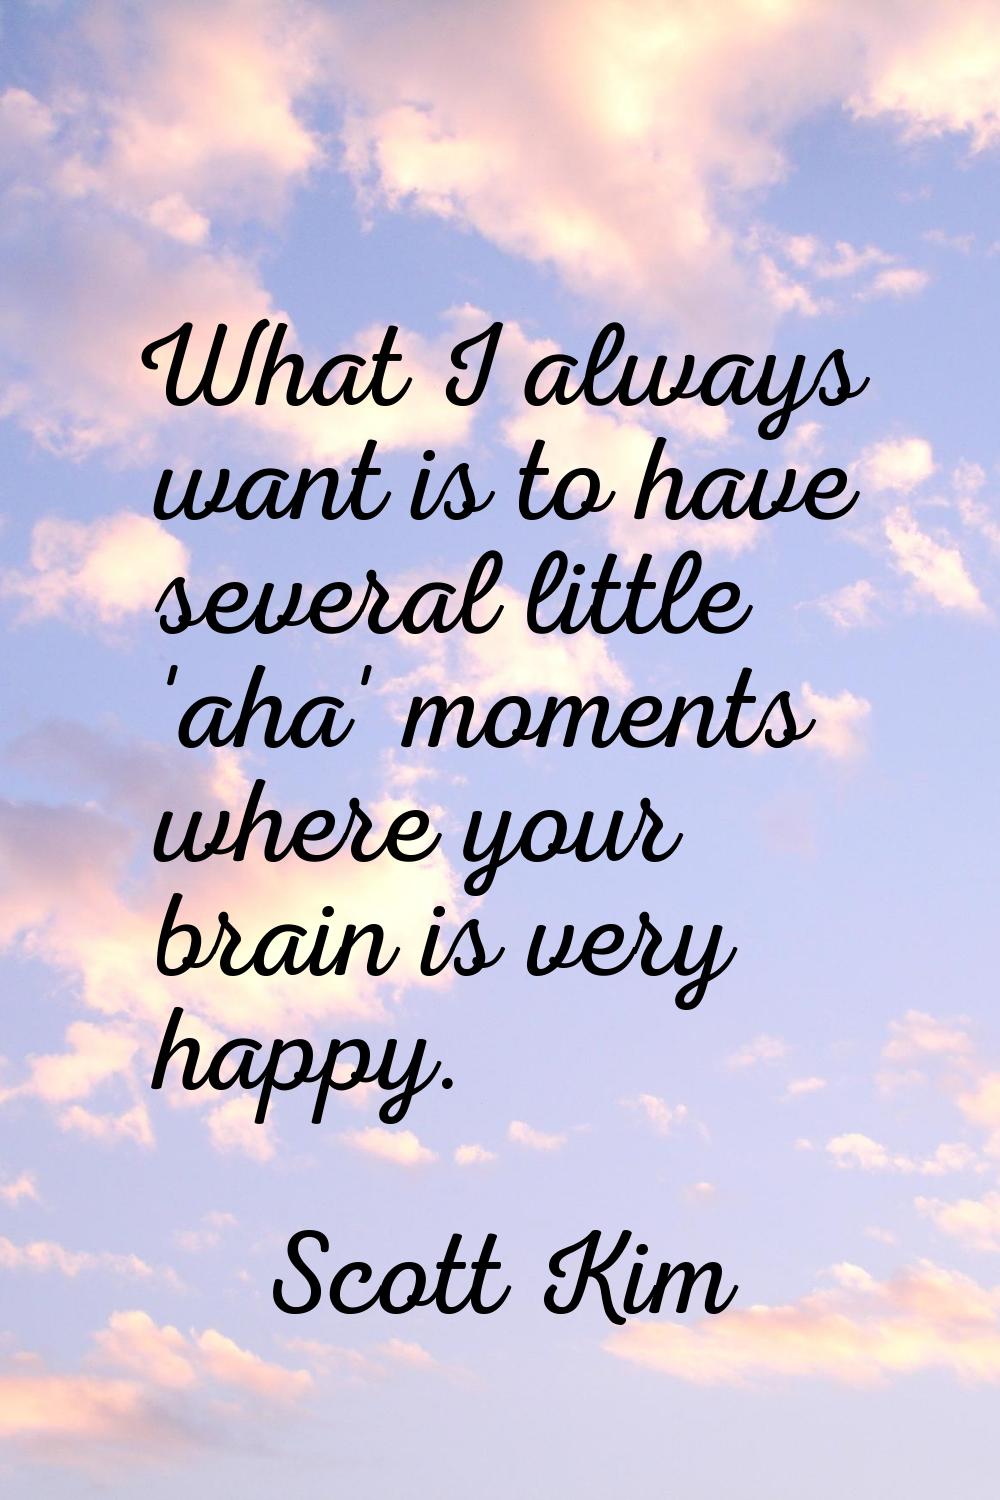 What I always want is to have several little 'aha' moments where your brain is very happy.